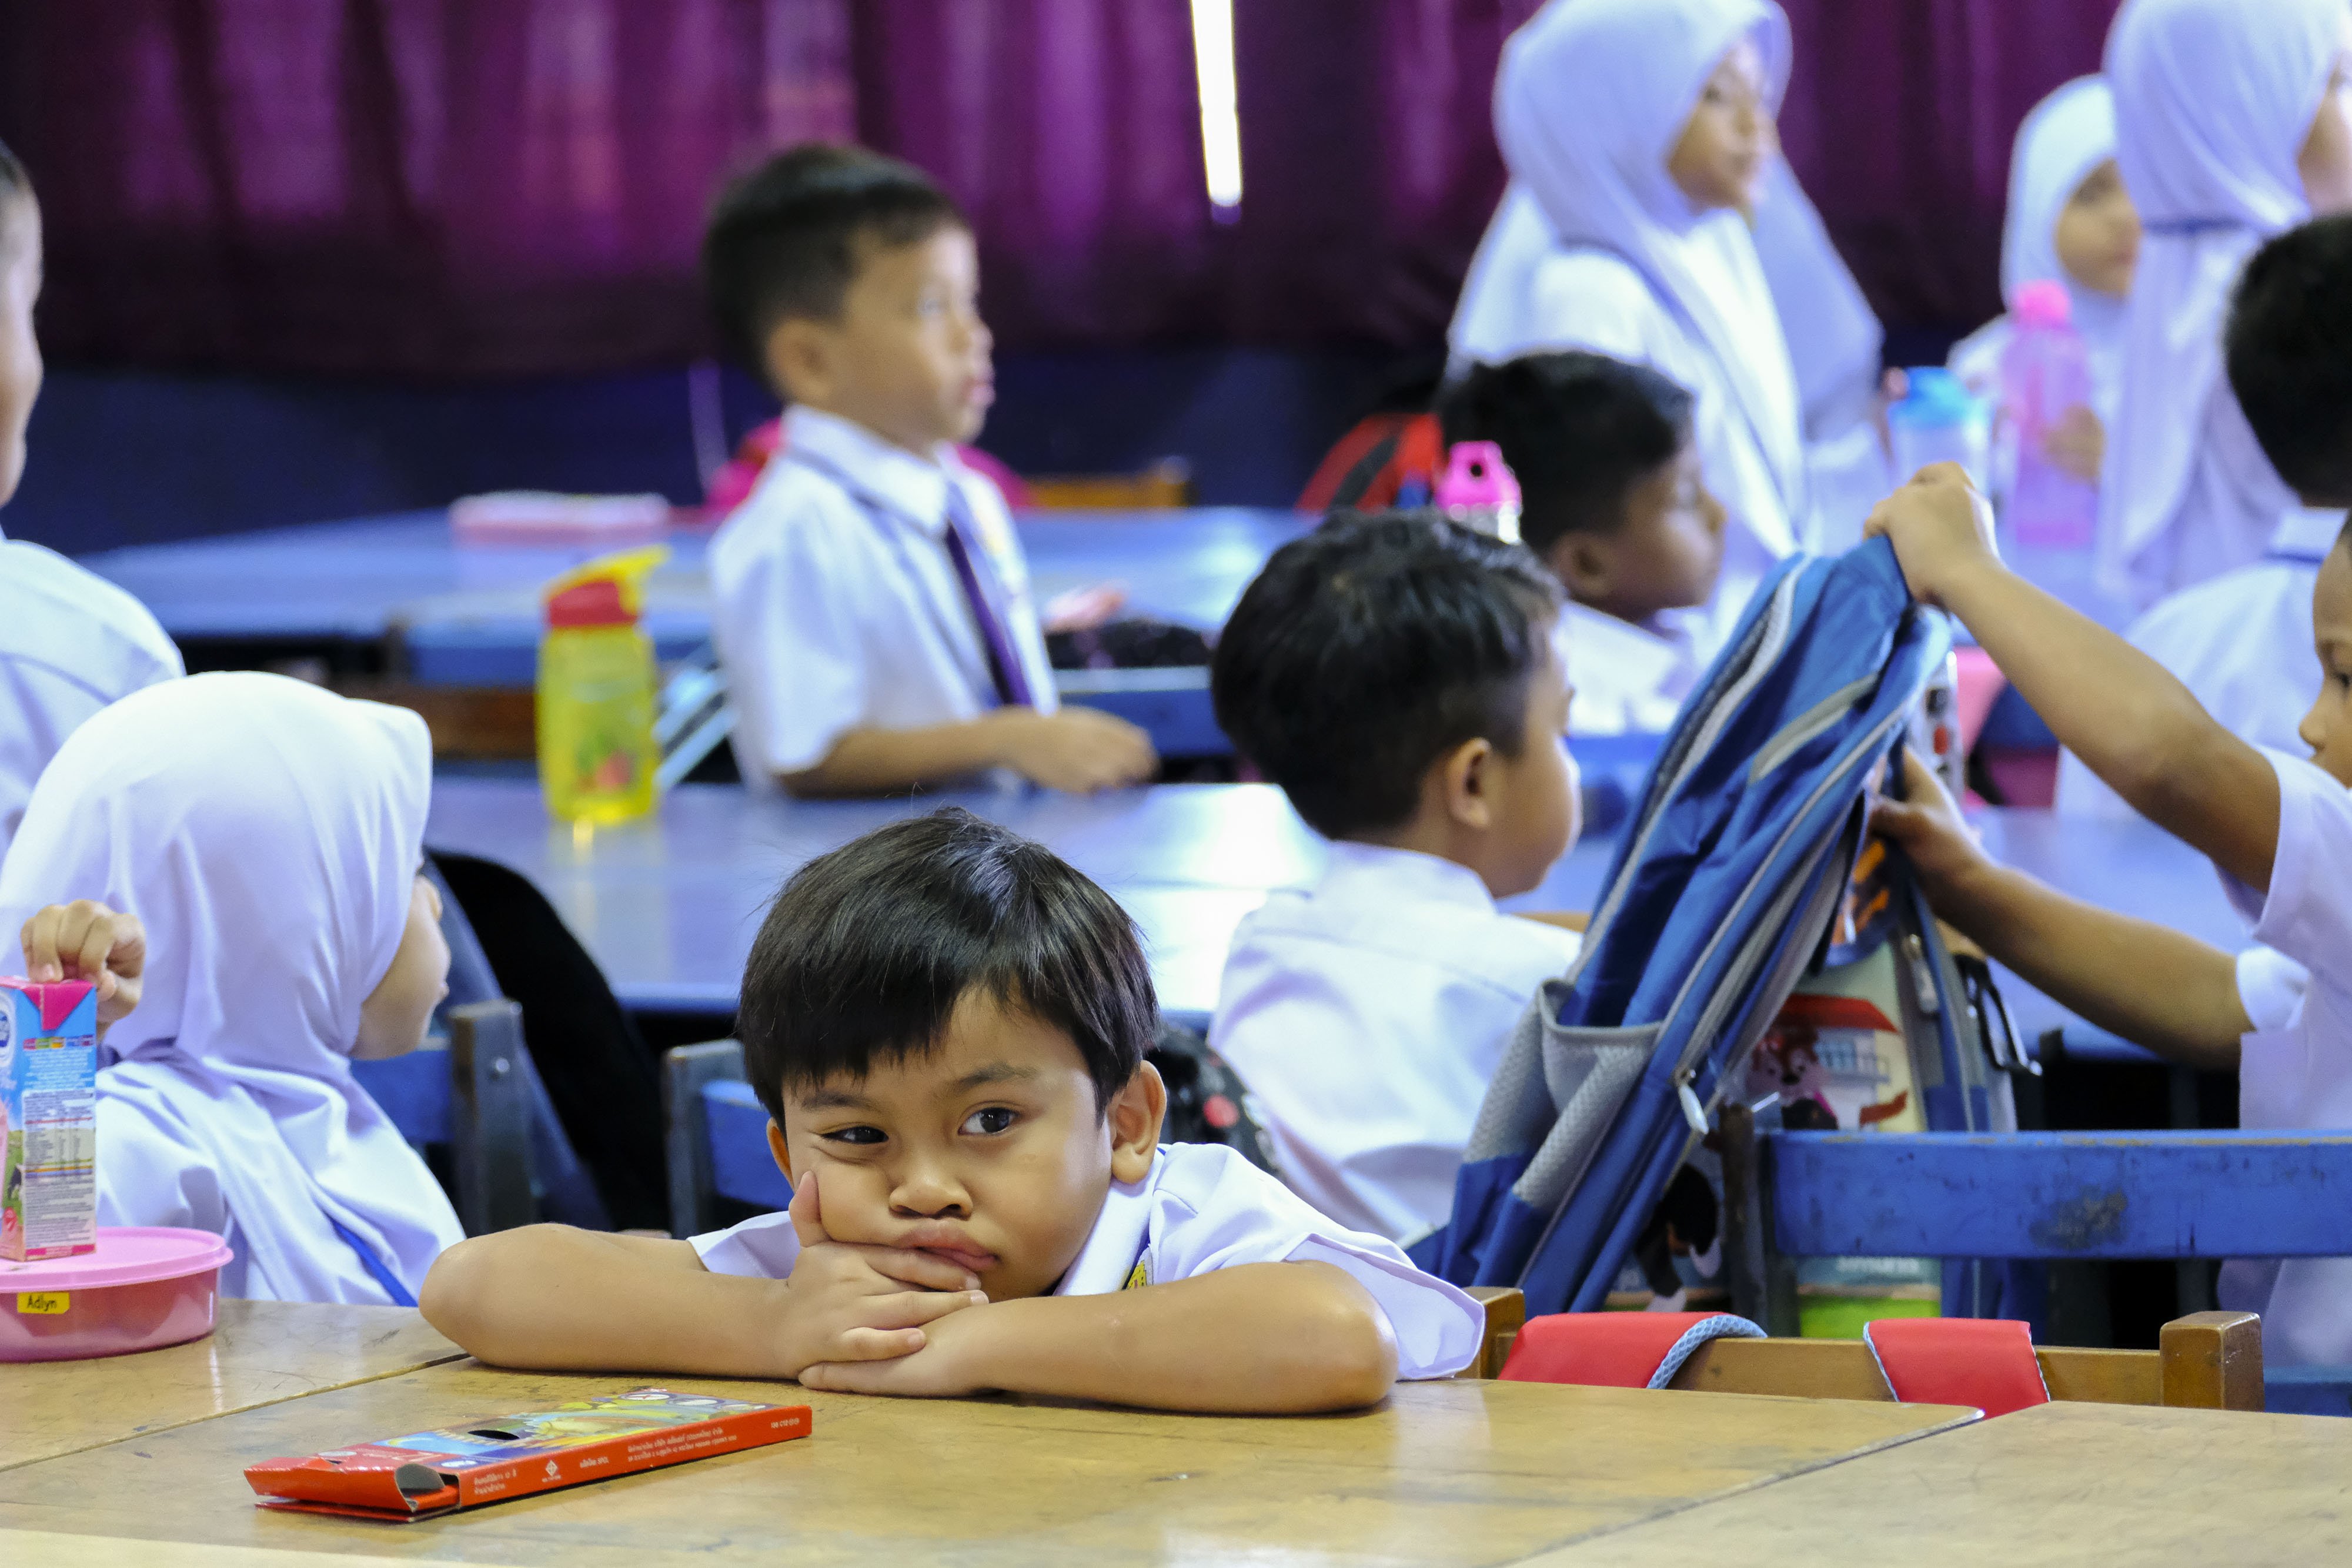 A year one pupils seen in class during the first day of school at Sk Seri Pristana. Malaysia school student have start their first day of school on 2th January 2020.|Photo: Getty Images